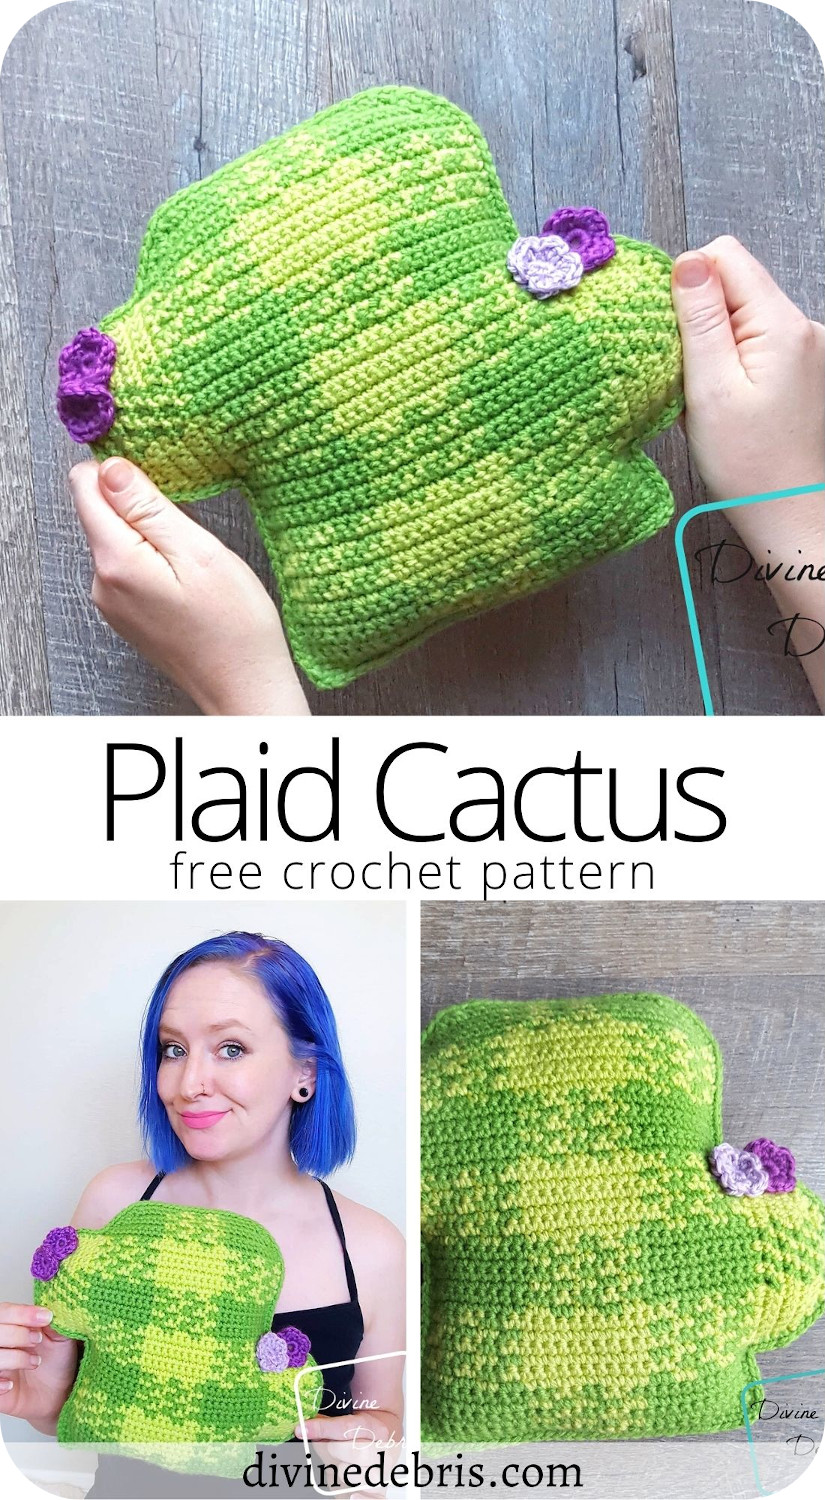 Learn to make a fun and excited plaid cactus (or a plain cactus) crochet amigurumi from this free pattern on DivineDebris.com